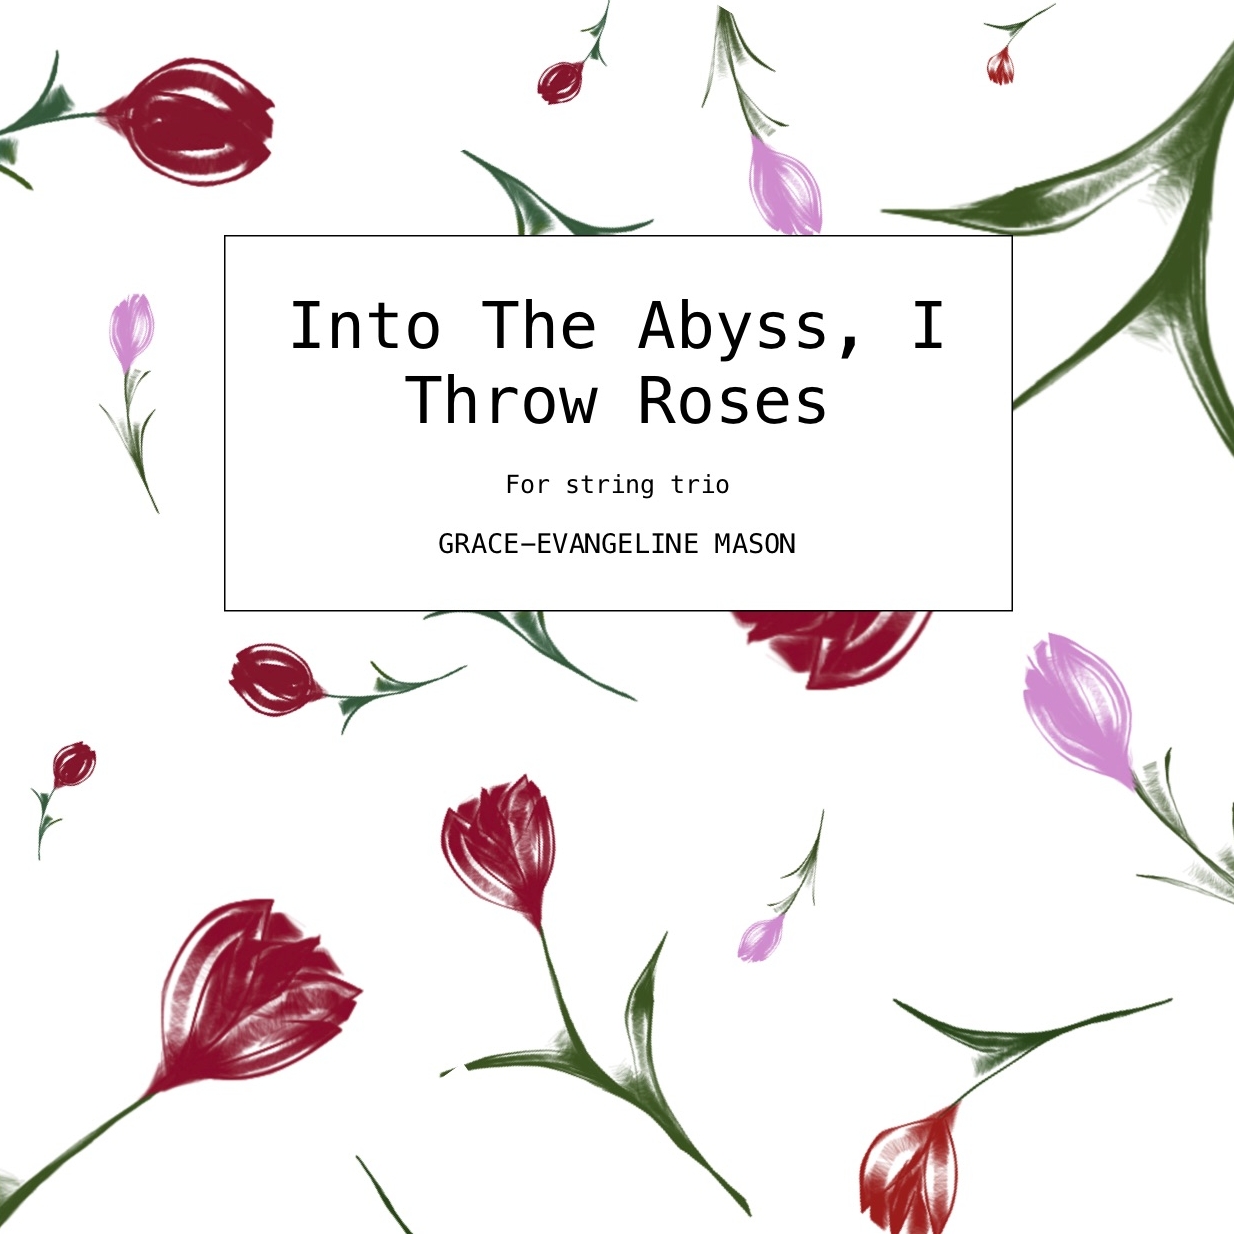 Into The Abyss, I Throw Roses (2018)